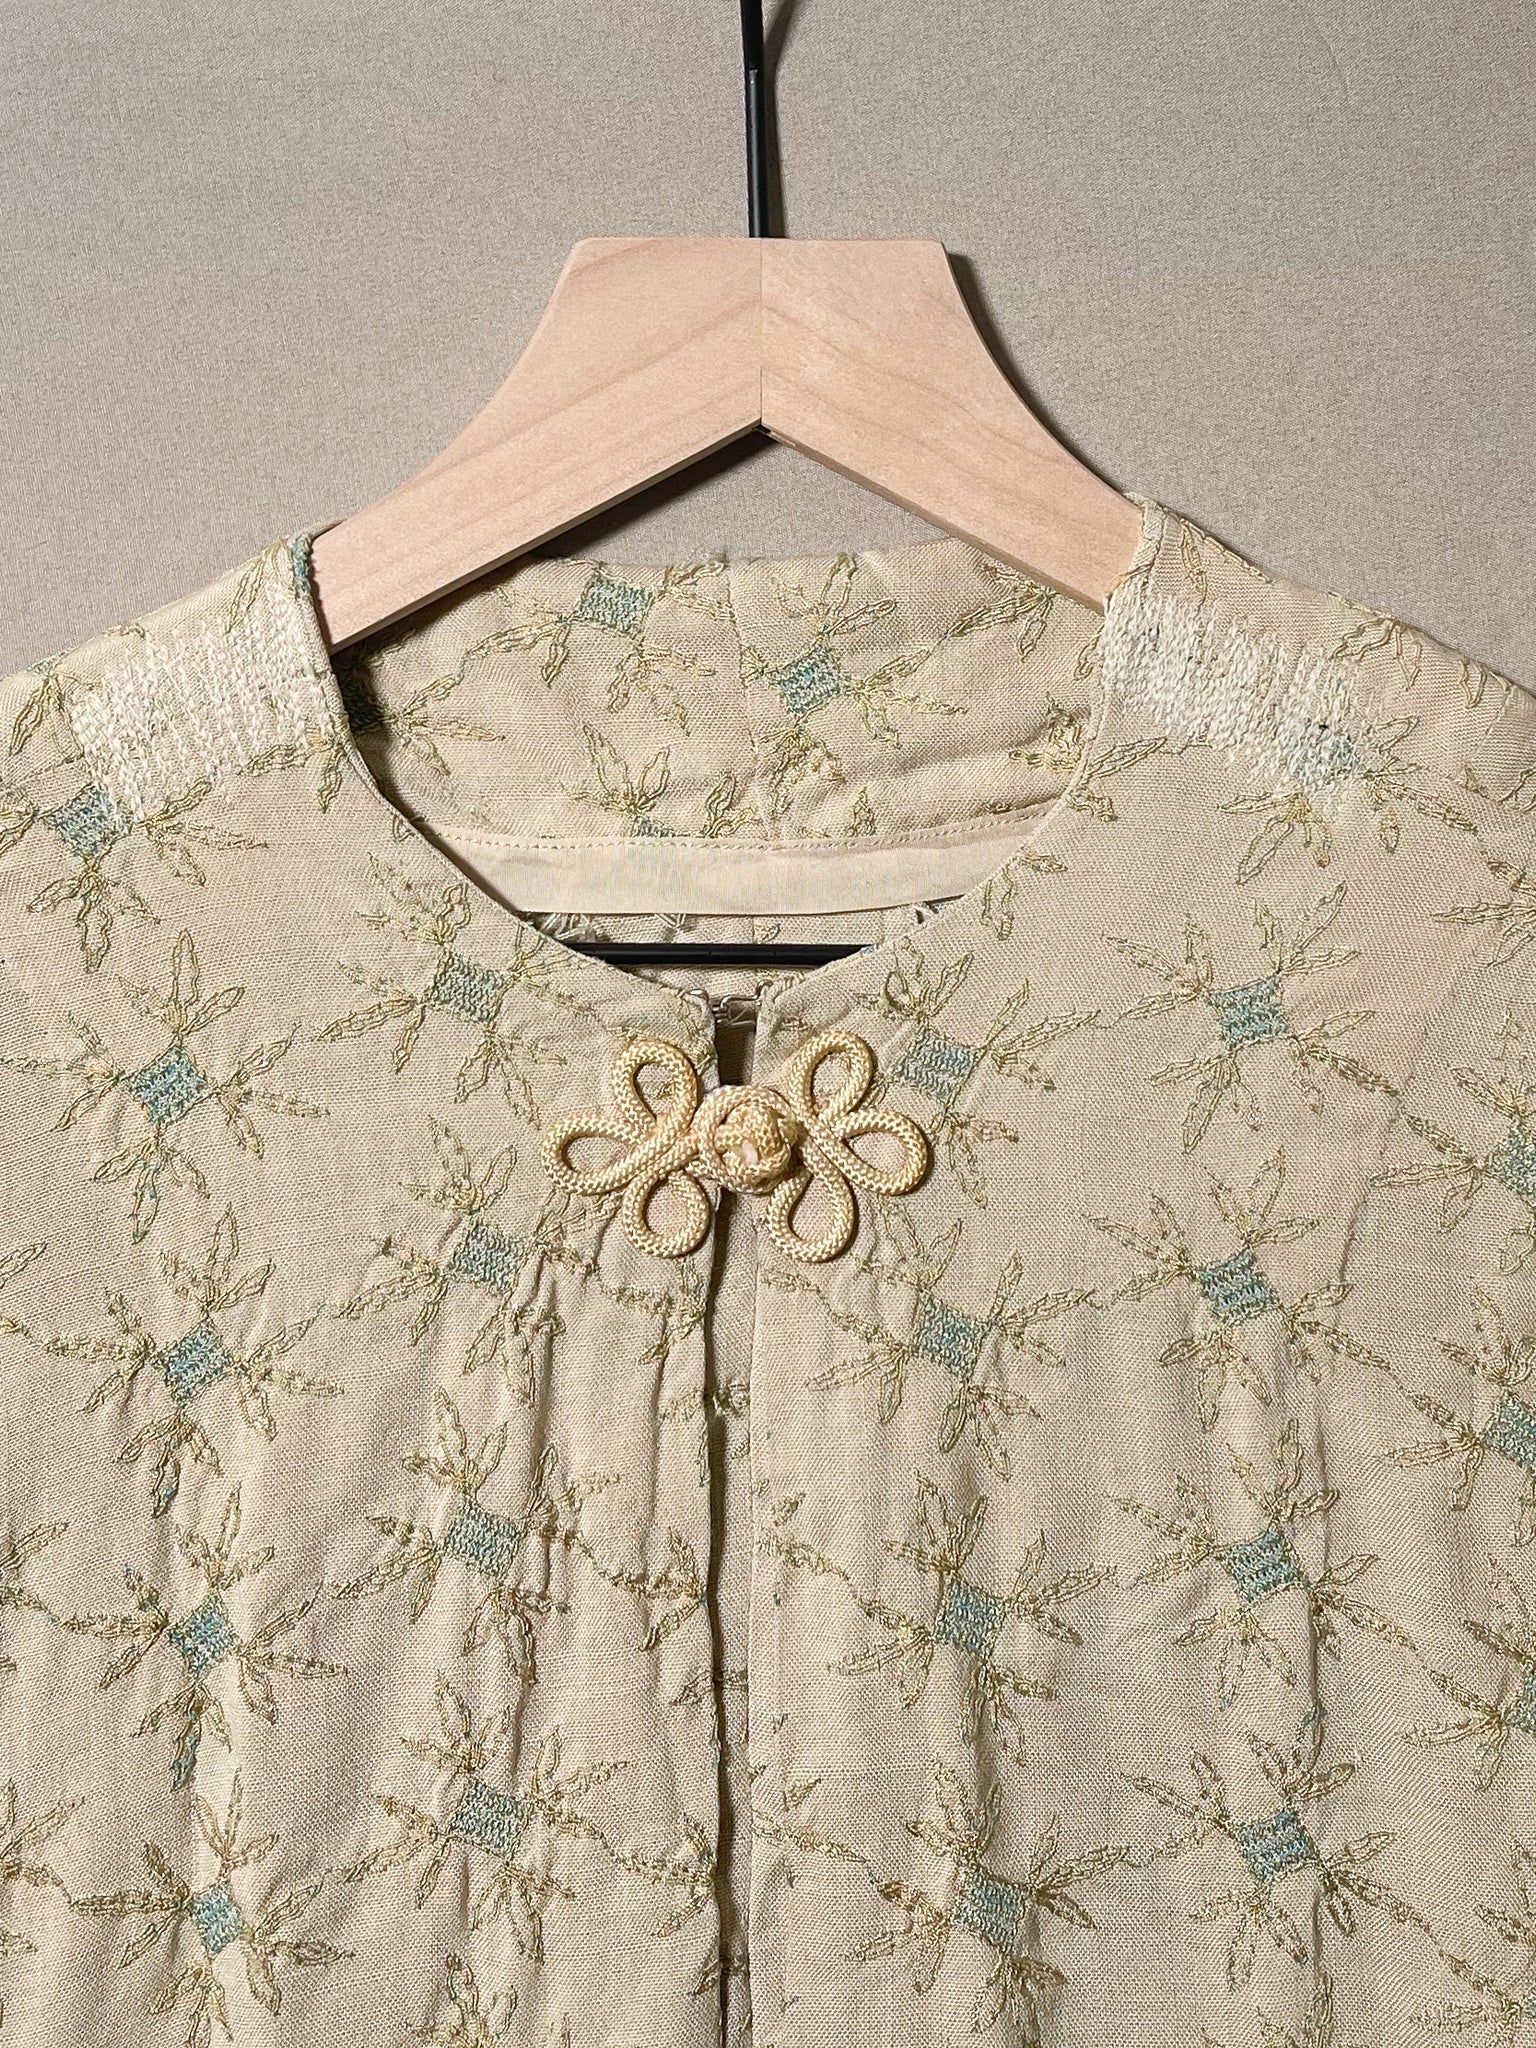 Repaired 1960s Ecru and Blue Theater Bed Jacket (F's US SML)